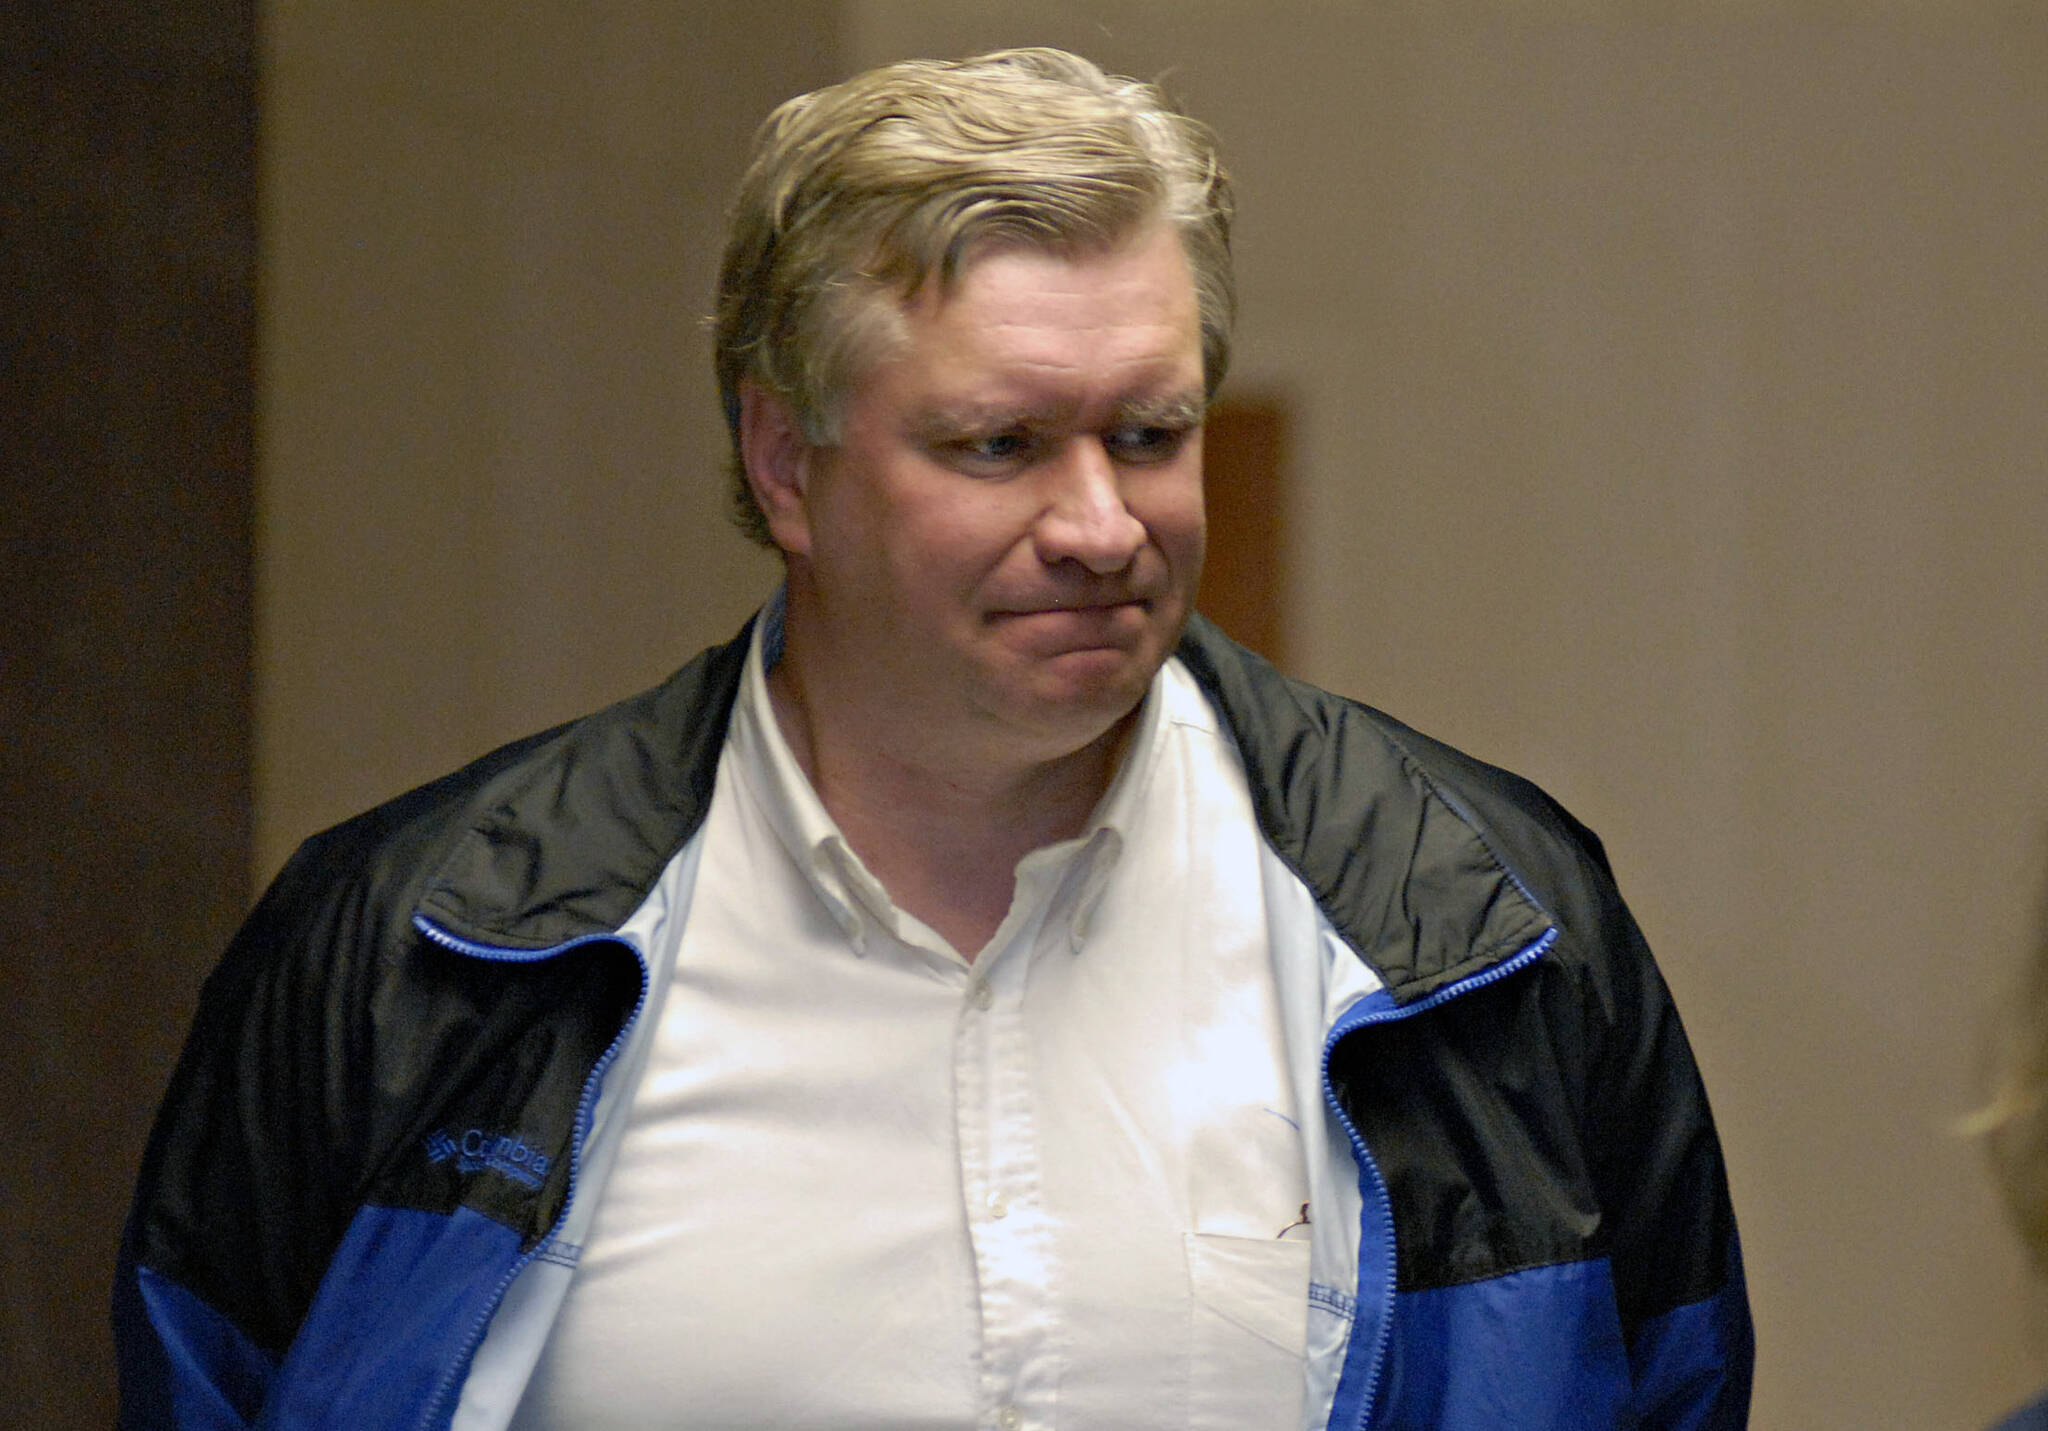 Alaska Rep. Victor Kohring, R-Wasilla, is led into the Federal Court Room for arraignment in Juneau, Alaska on Friday, May 4, 2007. Kohring, a former Alaska lawmaker who was caught up in a corruption scandal that roiled the state Legislature more than 15 years ago, has died in a vehicle crash. (AP File Photo / Chris Miller)